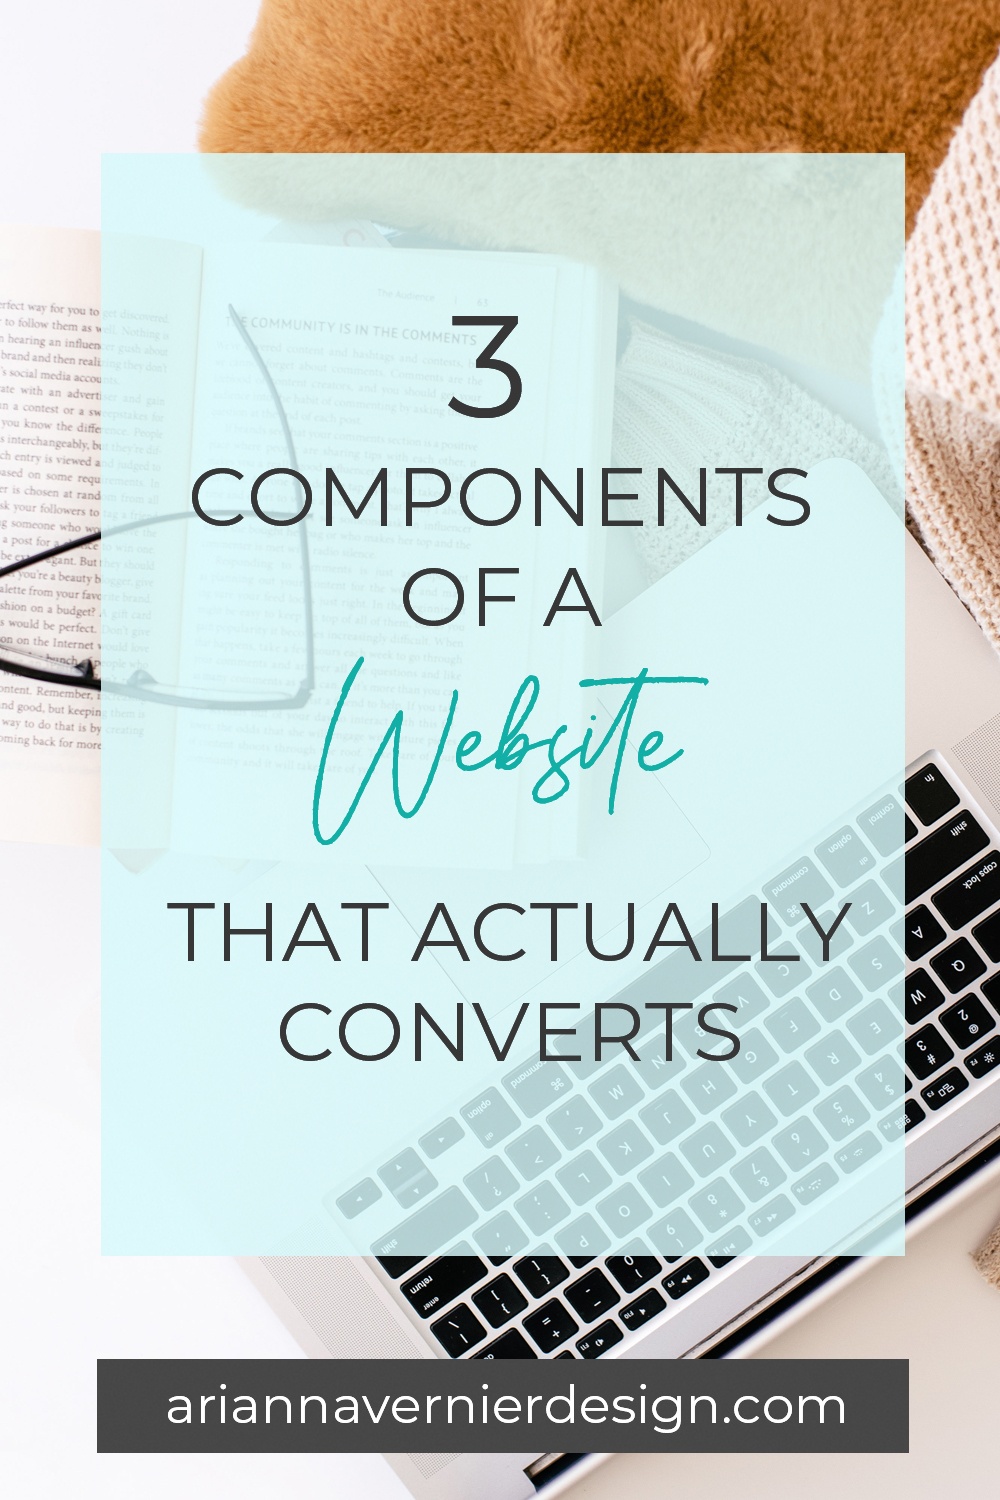 Pinterest pin with a laptop in the background, with a light blue rectangle over top, and the title "3 Components of a Website that Actually Converts"